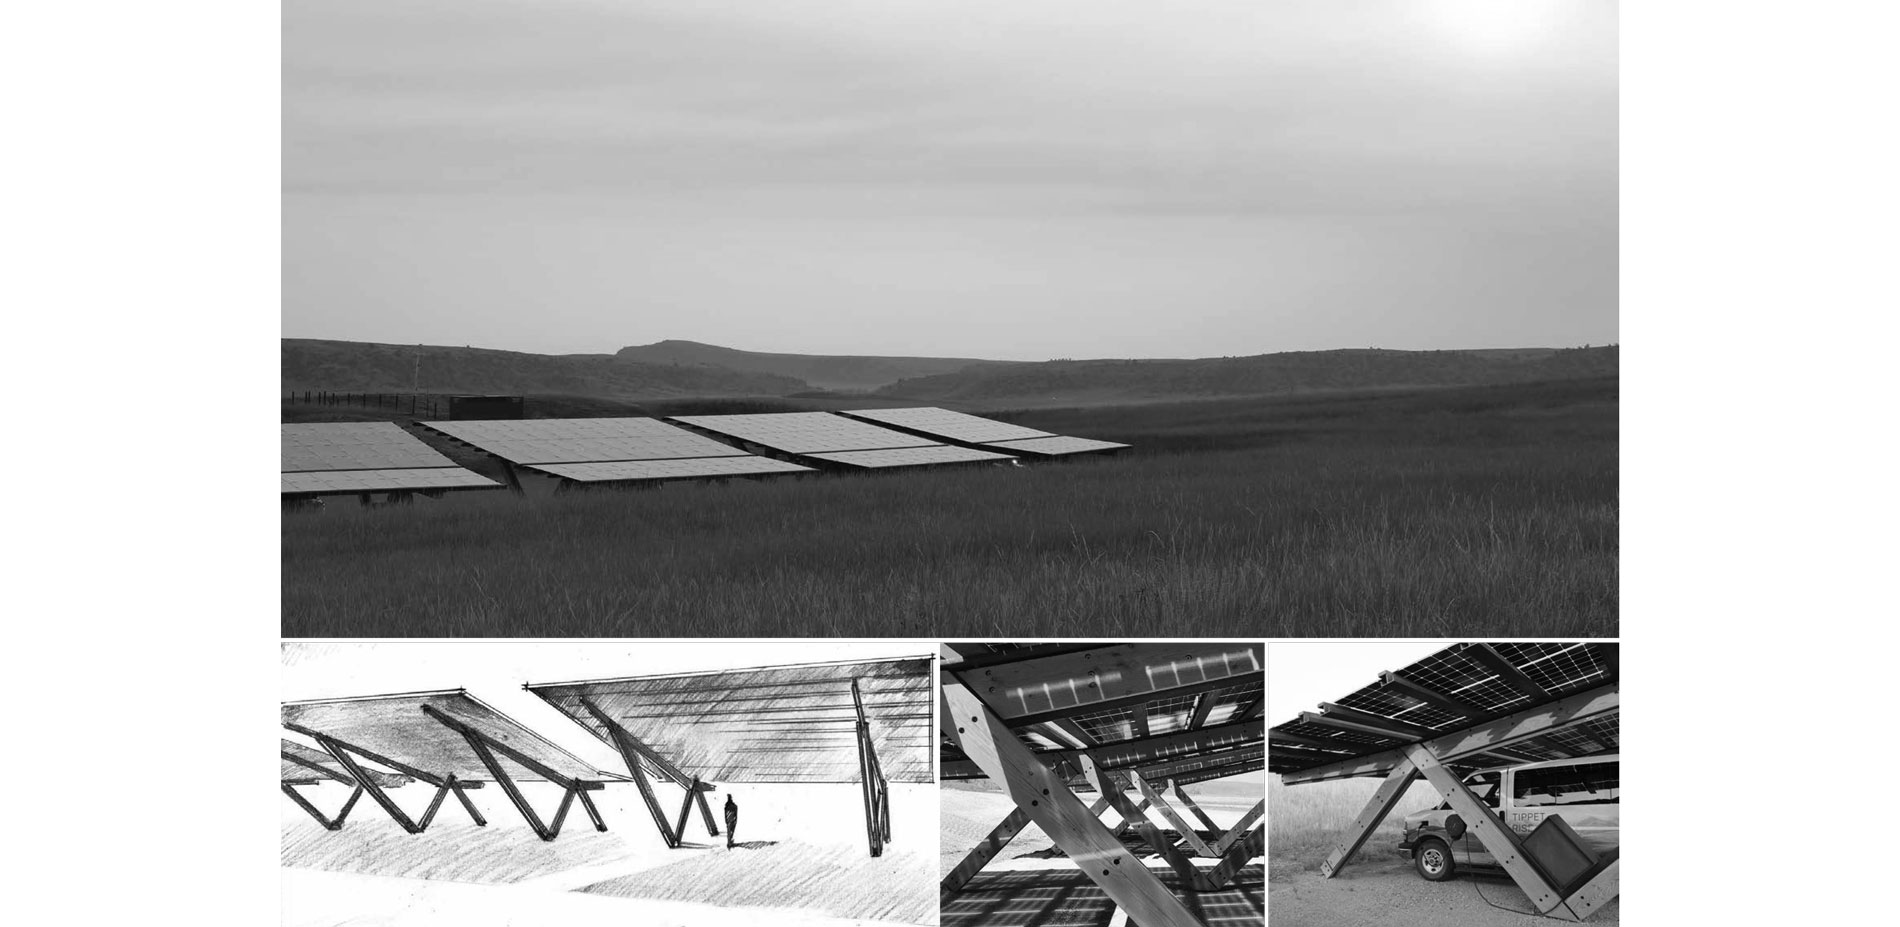 Tucked into the hillside, an 8,000 square foot array of photovoltaic panels powers Tippet Rise’s fleet of electric vehicles. During events, the panels…